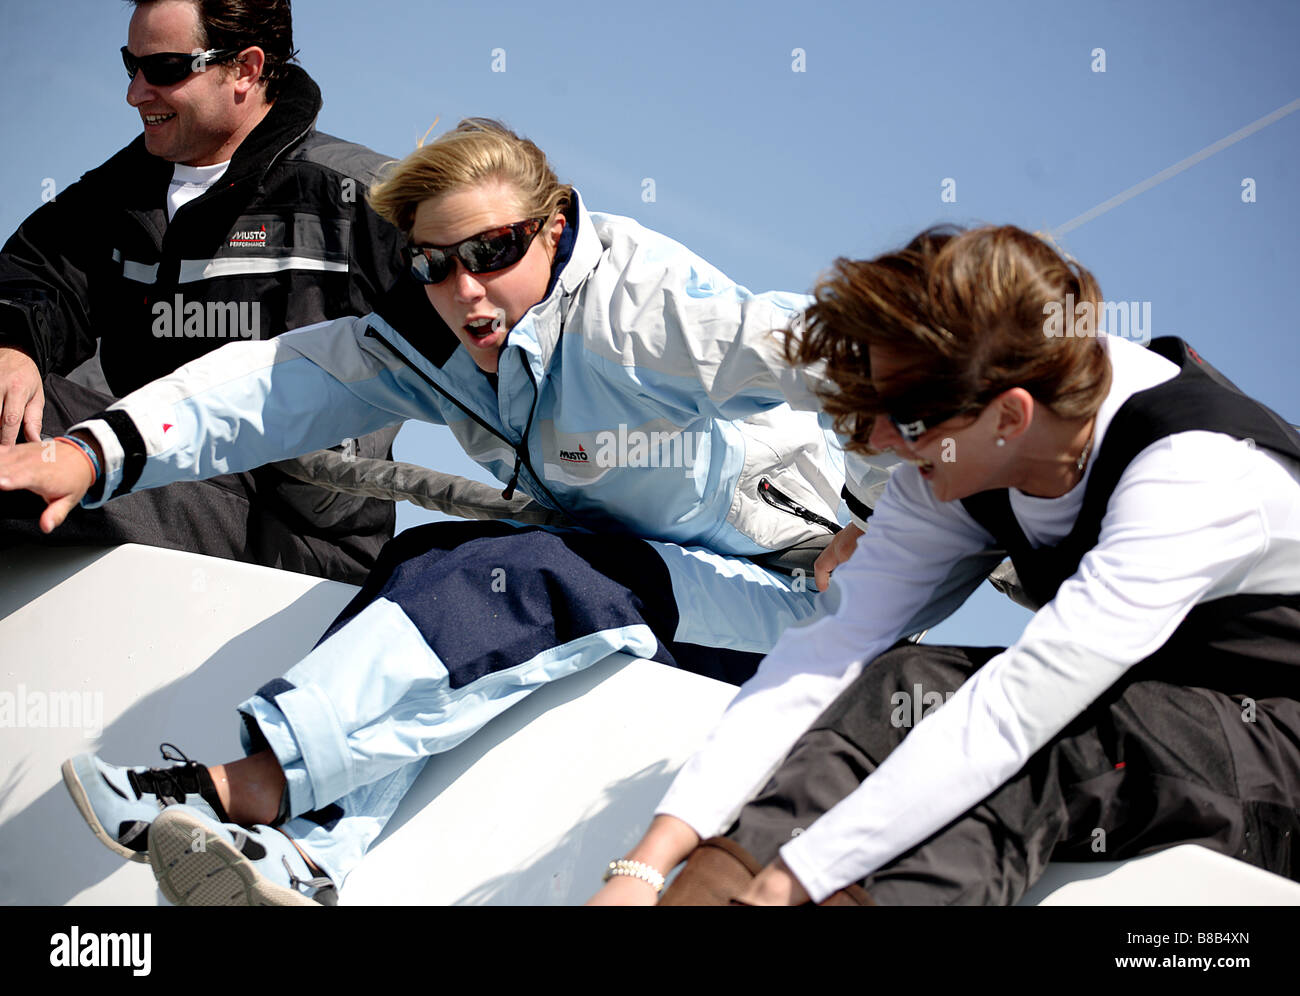 3 adults,2 woman and 1 man leaning over the edge of a yacht while racing. The picture is color in a landscape format. Stock Photo